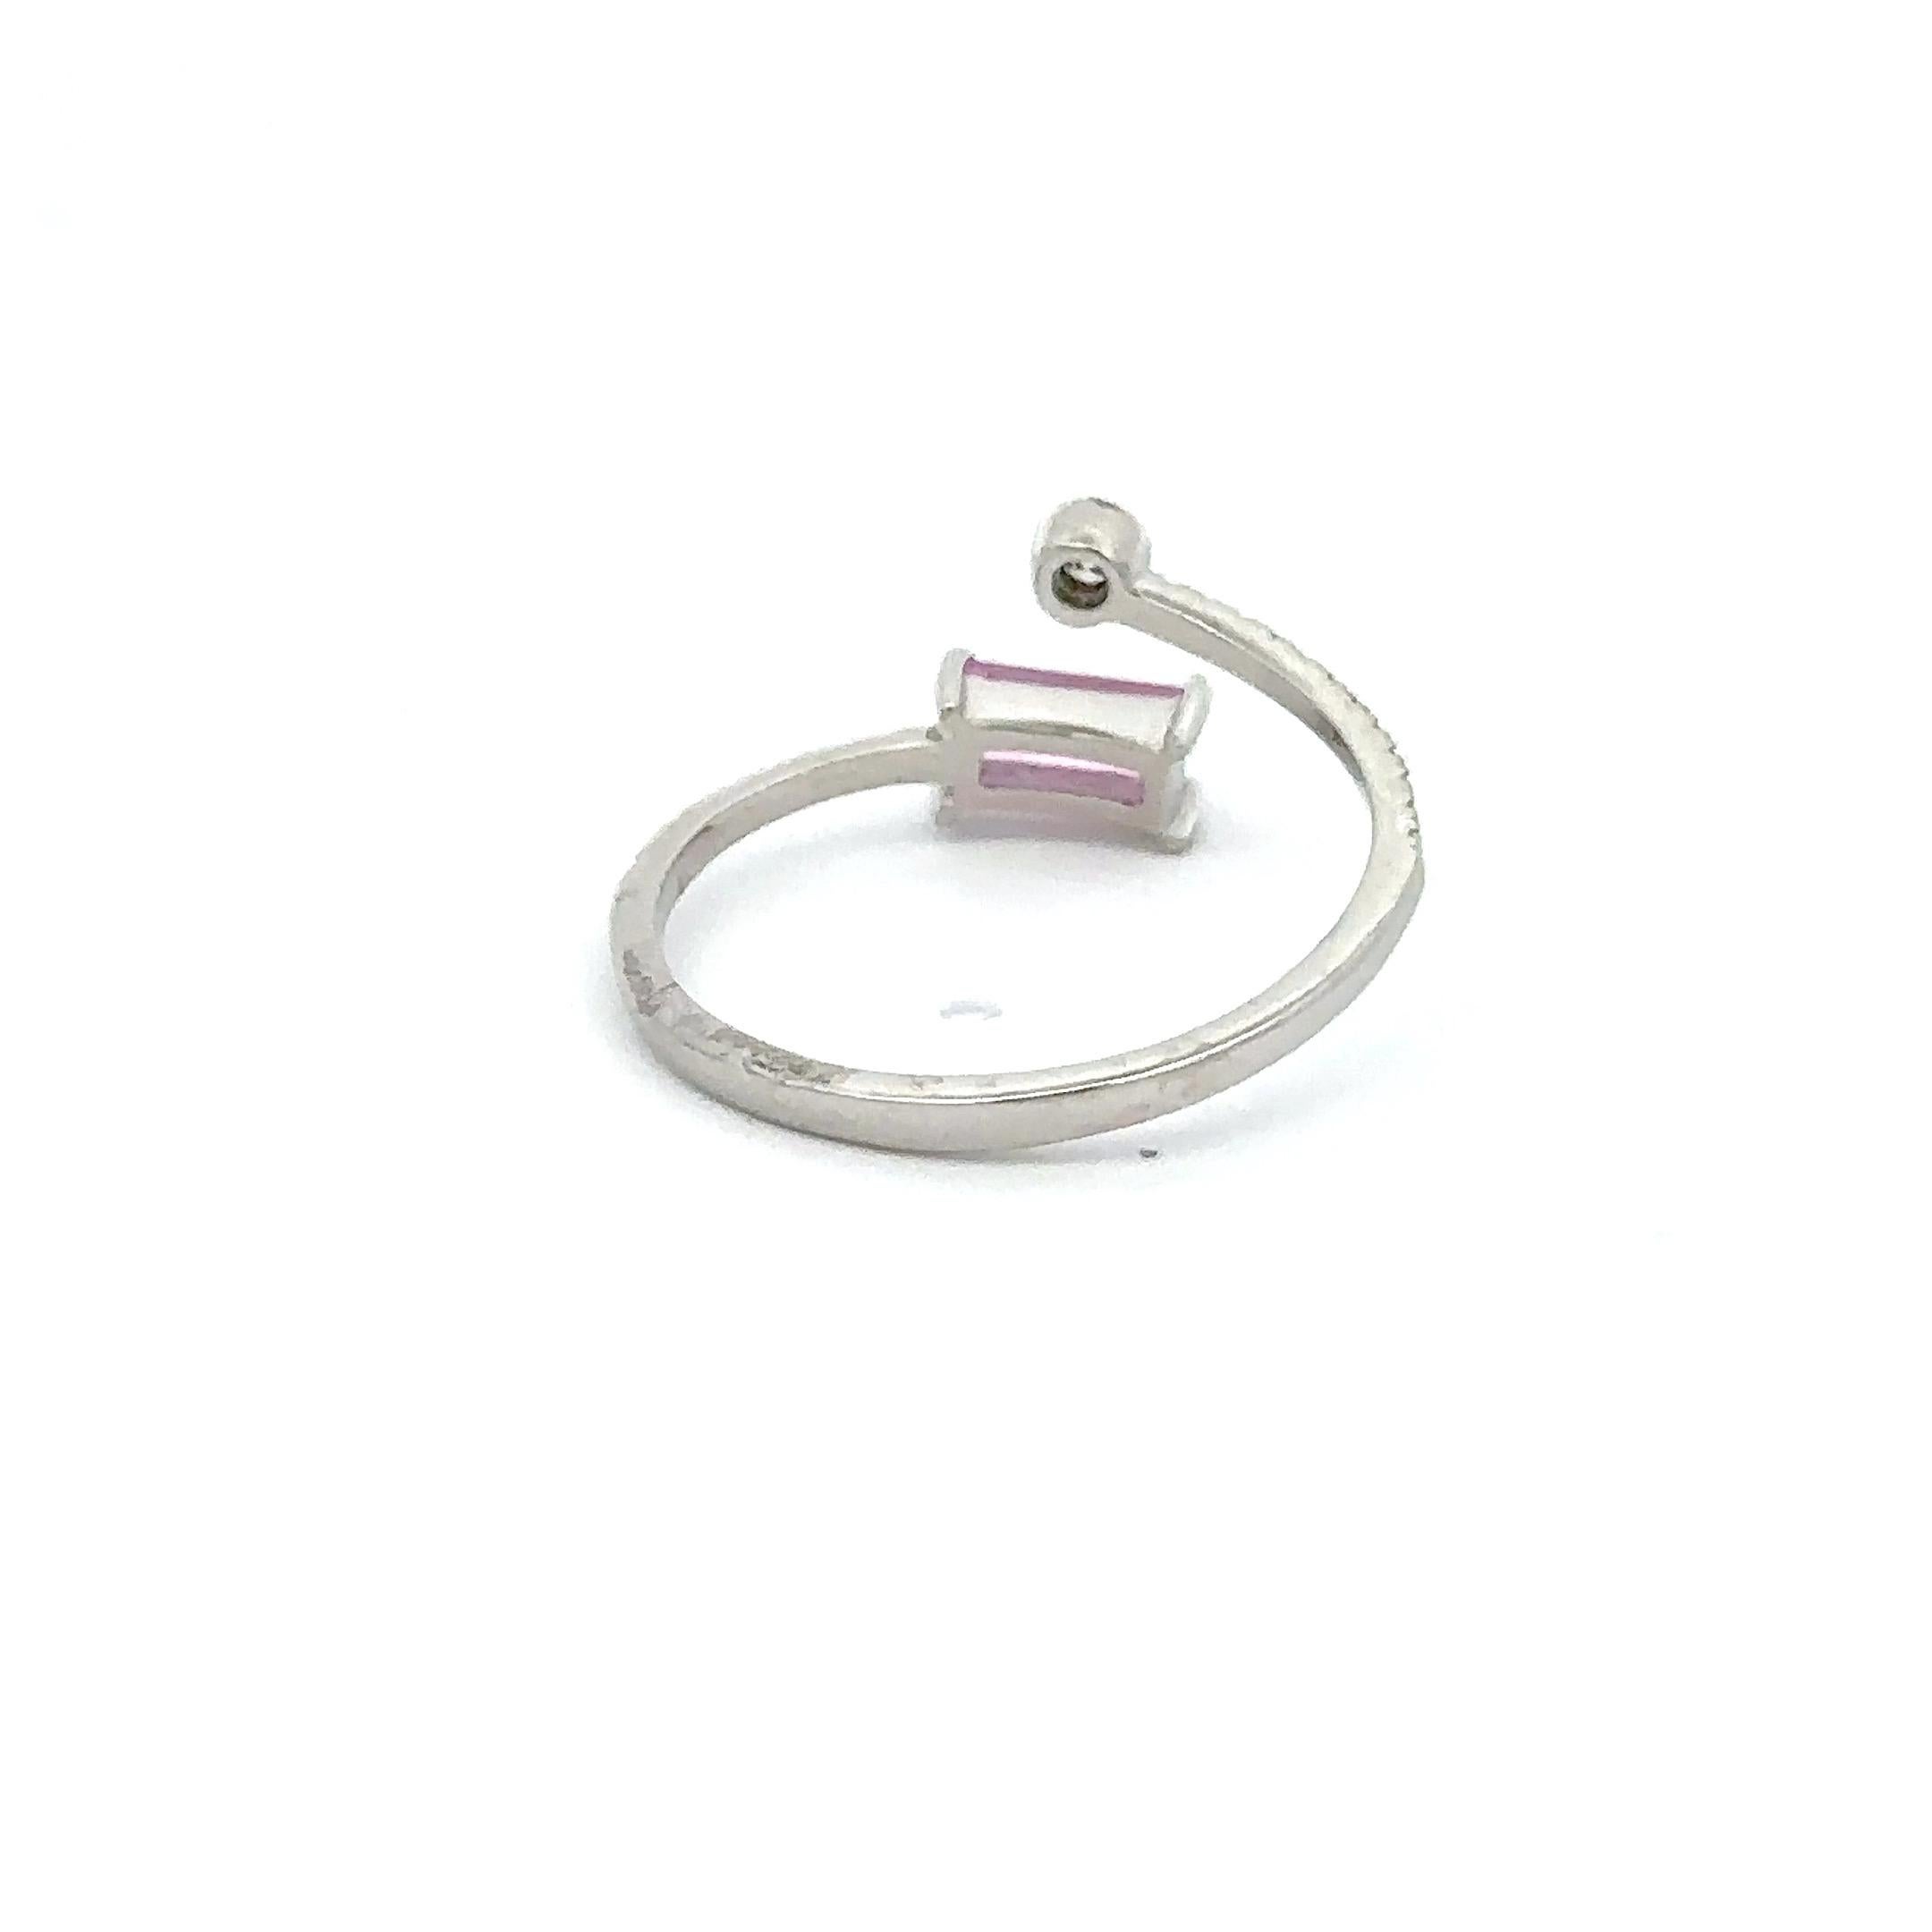 For Sale:  Minimalist Open Ended Ring with Baguette Cut Pink Sapphire and Diamond 6